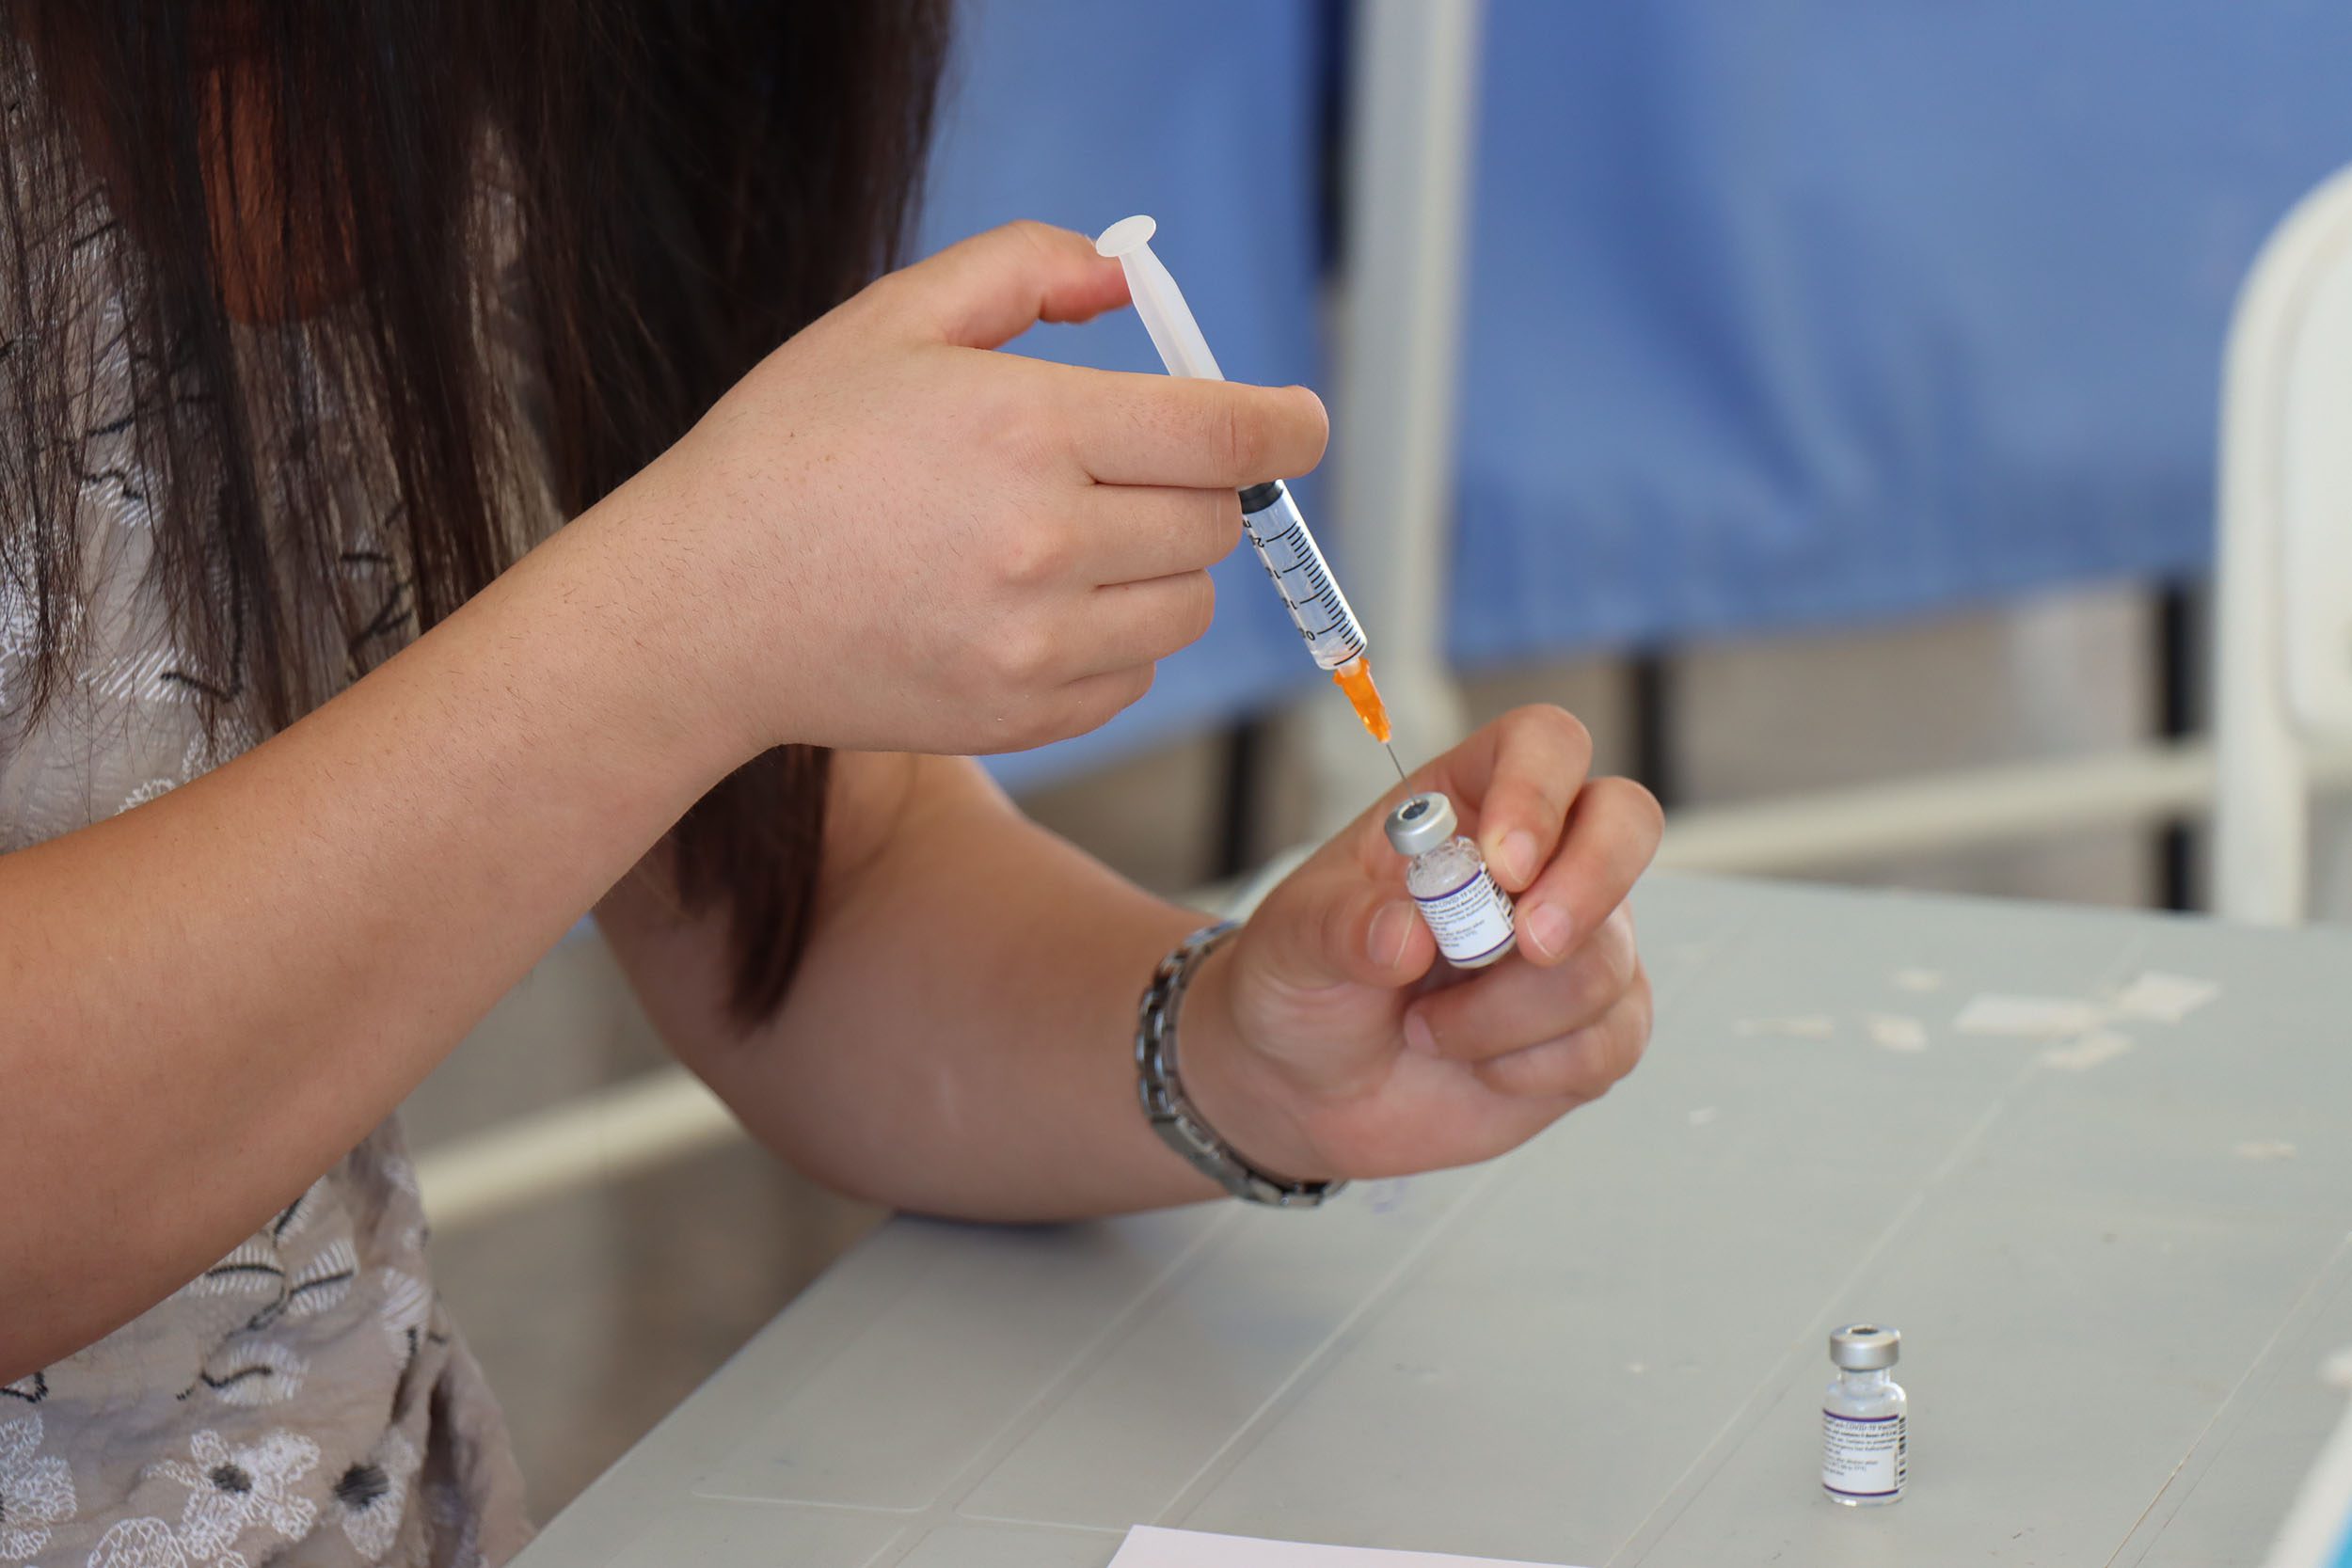 More than 51.6 million fully vaccinated against COVID-19 in Turkey